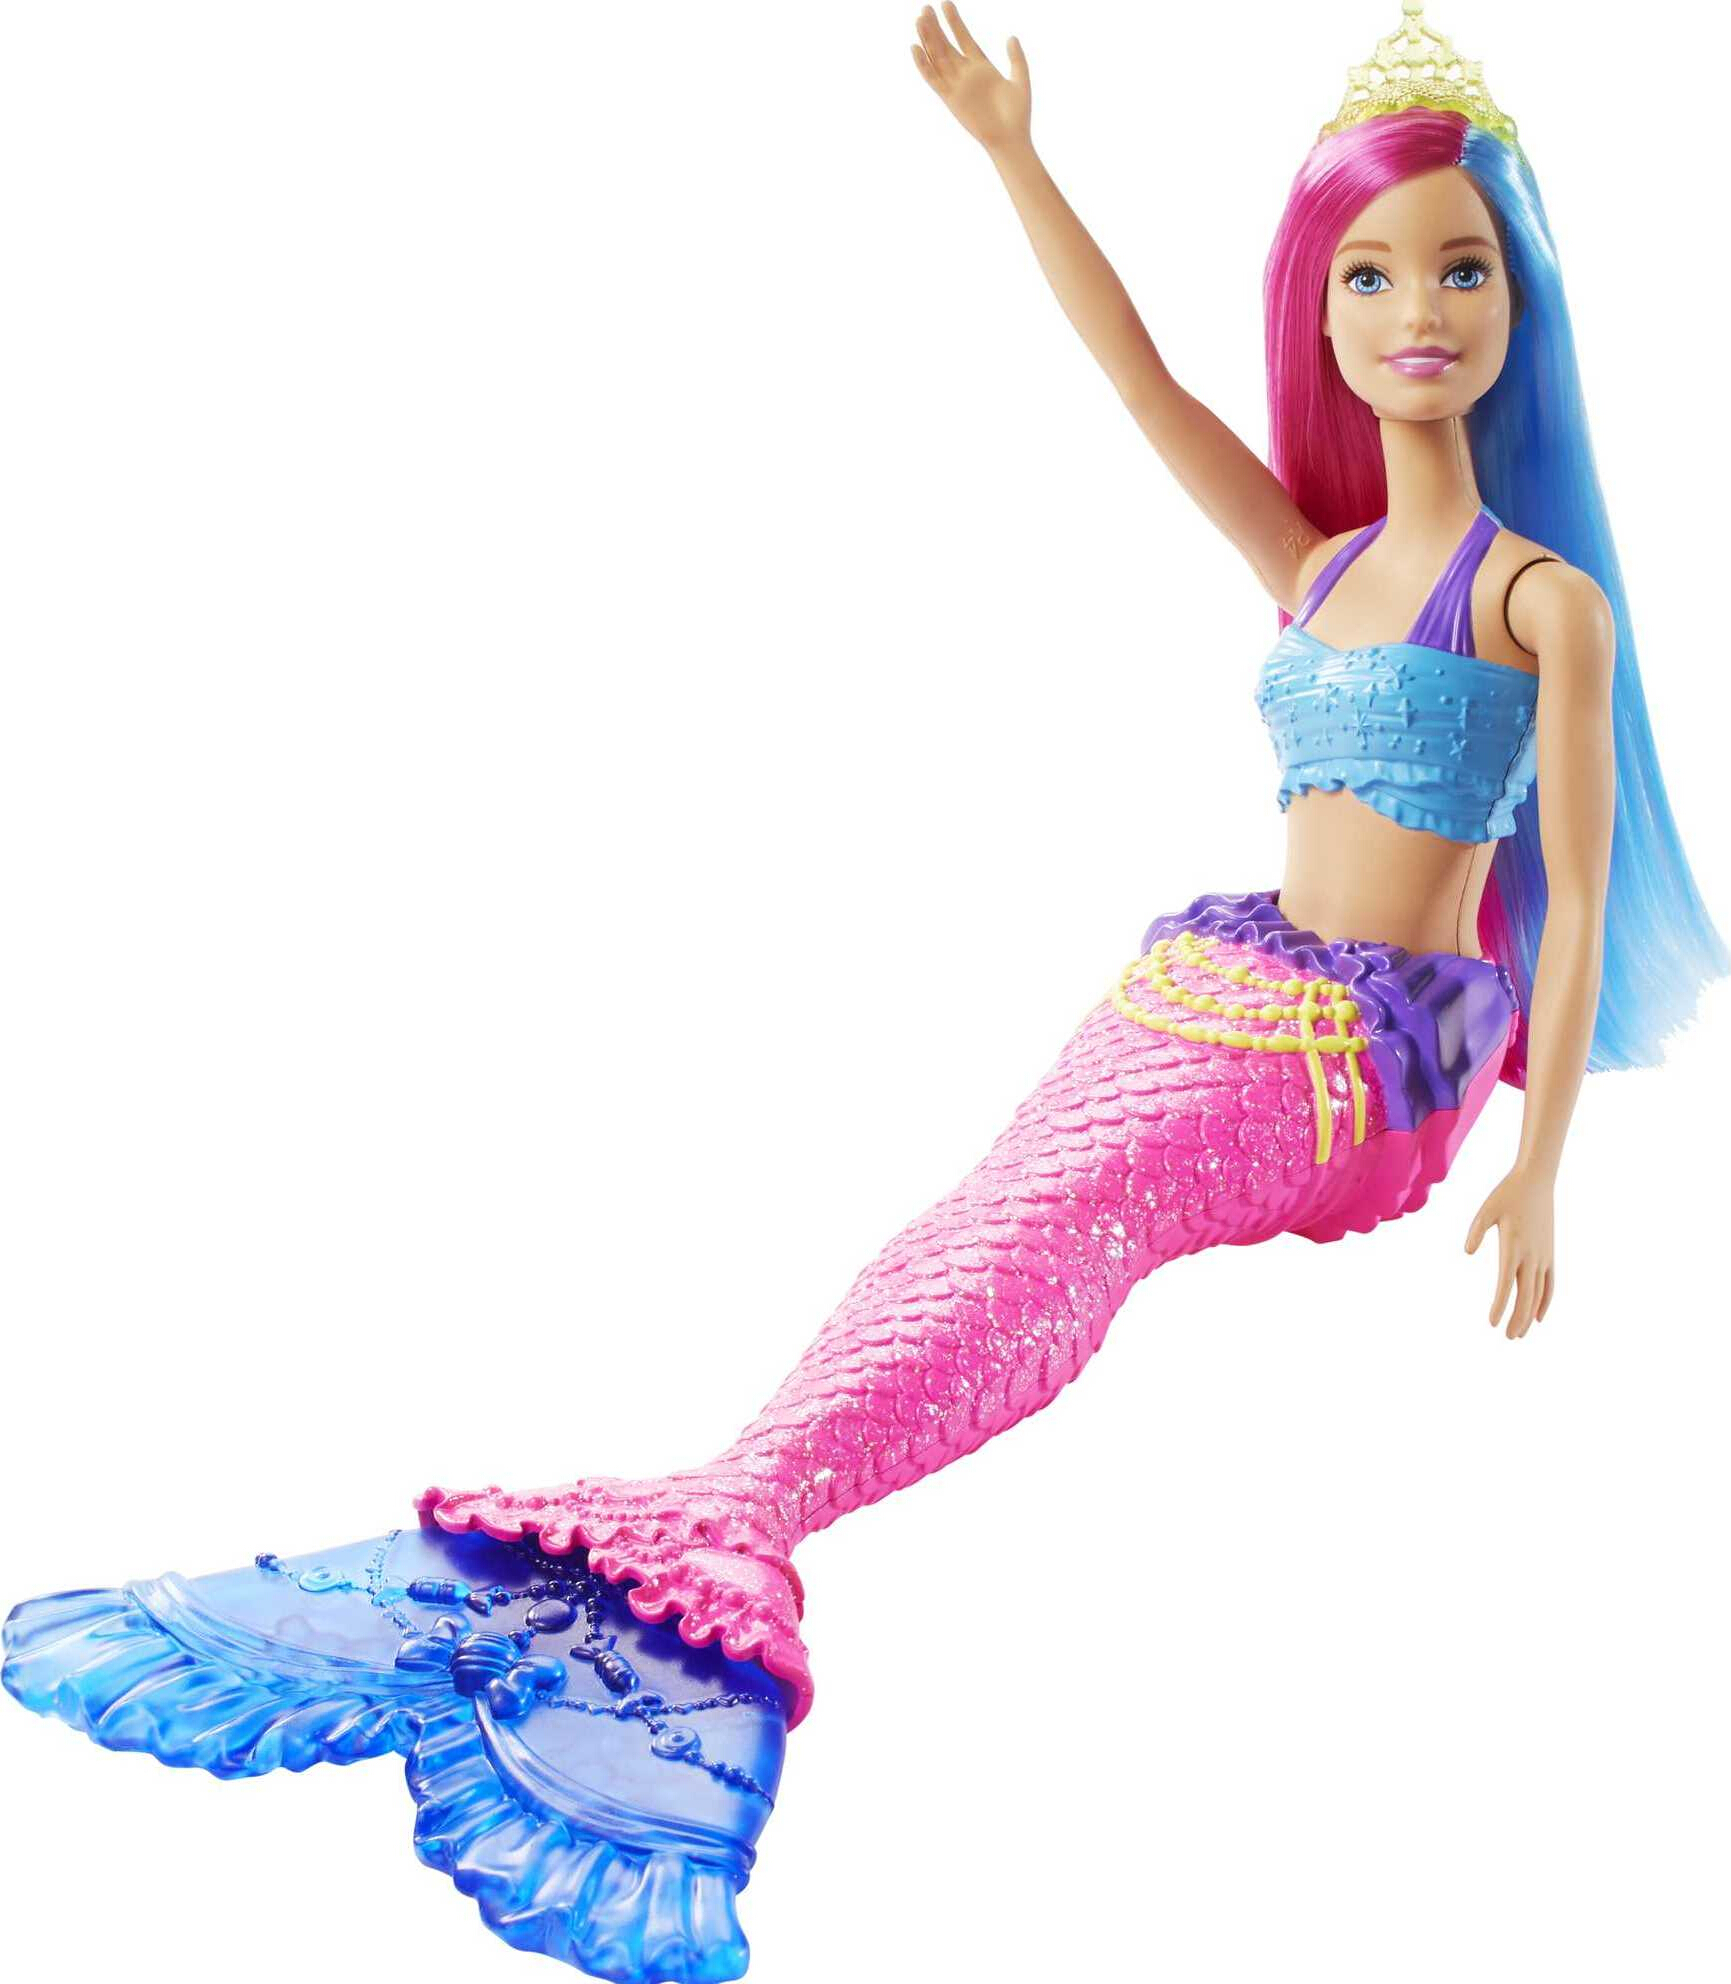 Barbie Dreamtopia Mermaid Doll with Pink & Blue Hair & Tail, Plus Tiara Accessory - image 5 of 6